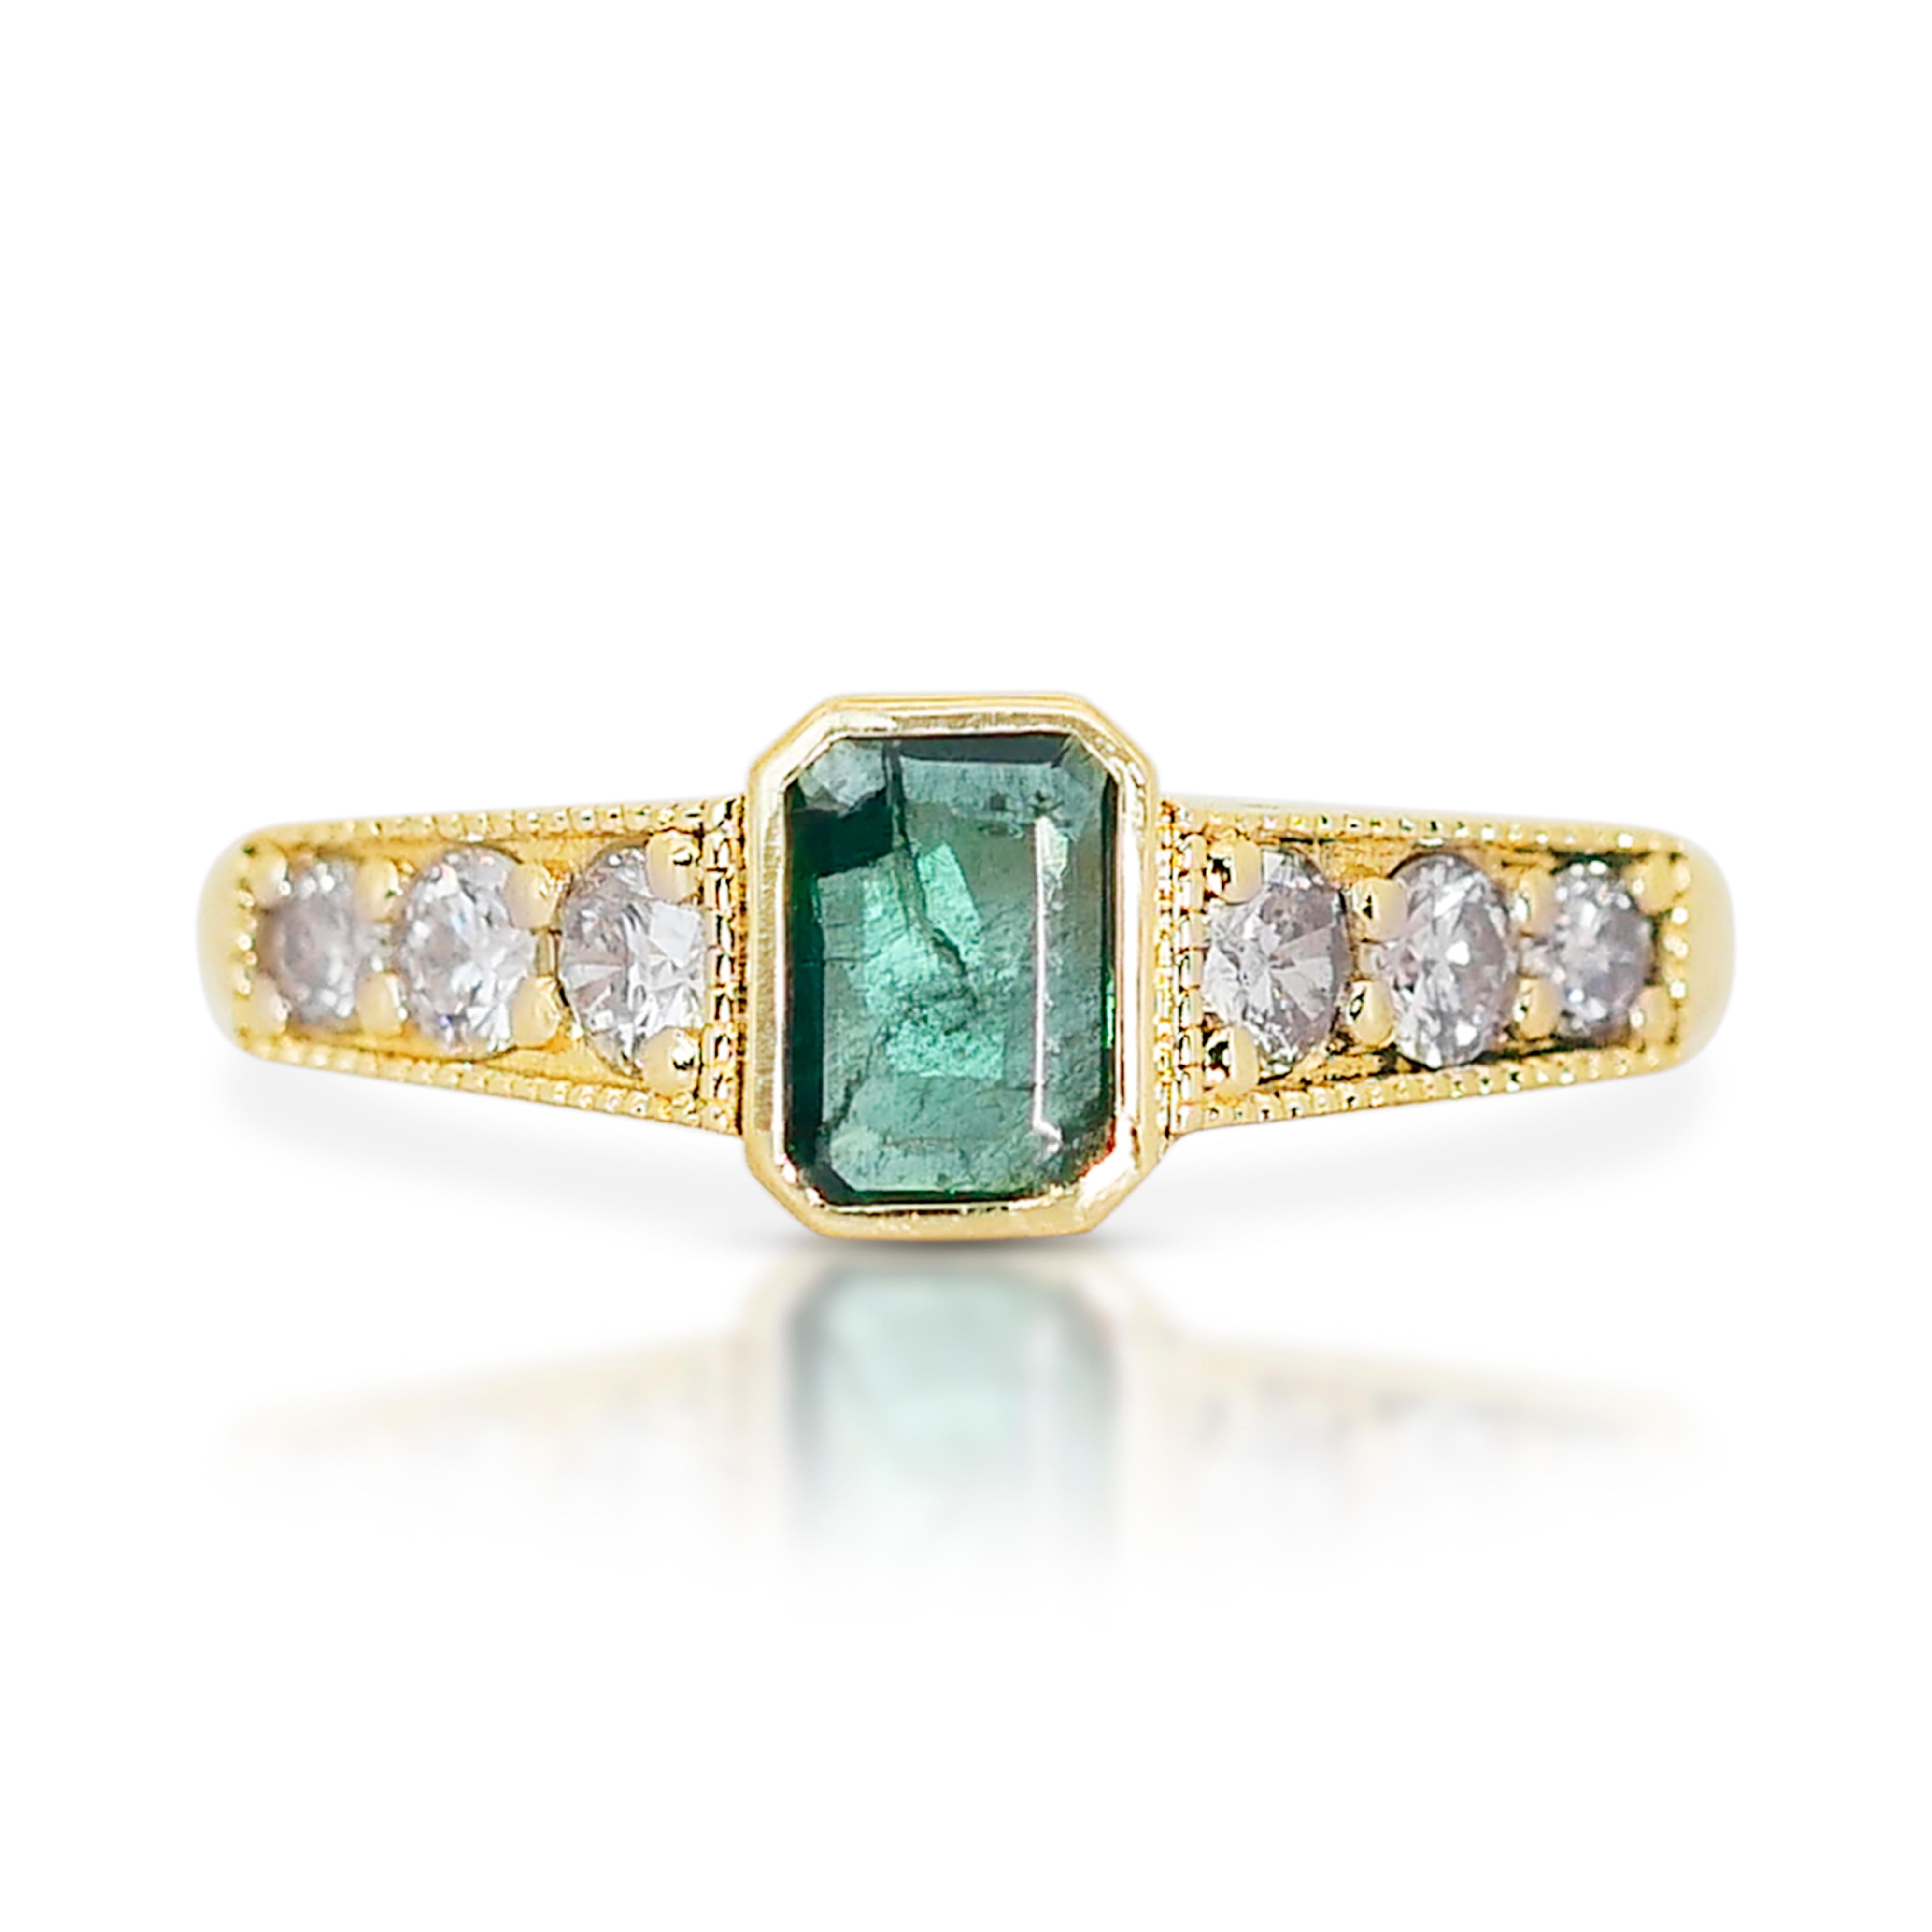 Enchanting 14k Yellow Gold Emerald and Diamond Pave Ring w/0.89 ct - IGI Certified

This enchanting ring, crafted in glowing 14k yellow gold, features a beautiful combination of a captivating emerald and sparkling diamonds. The centerpiece is a